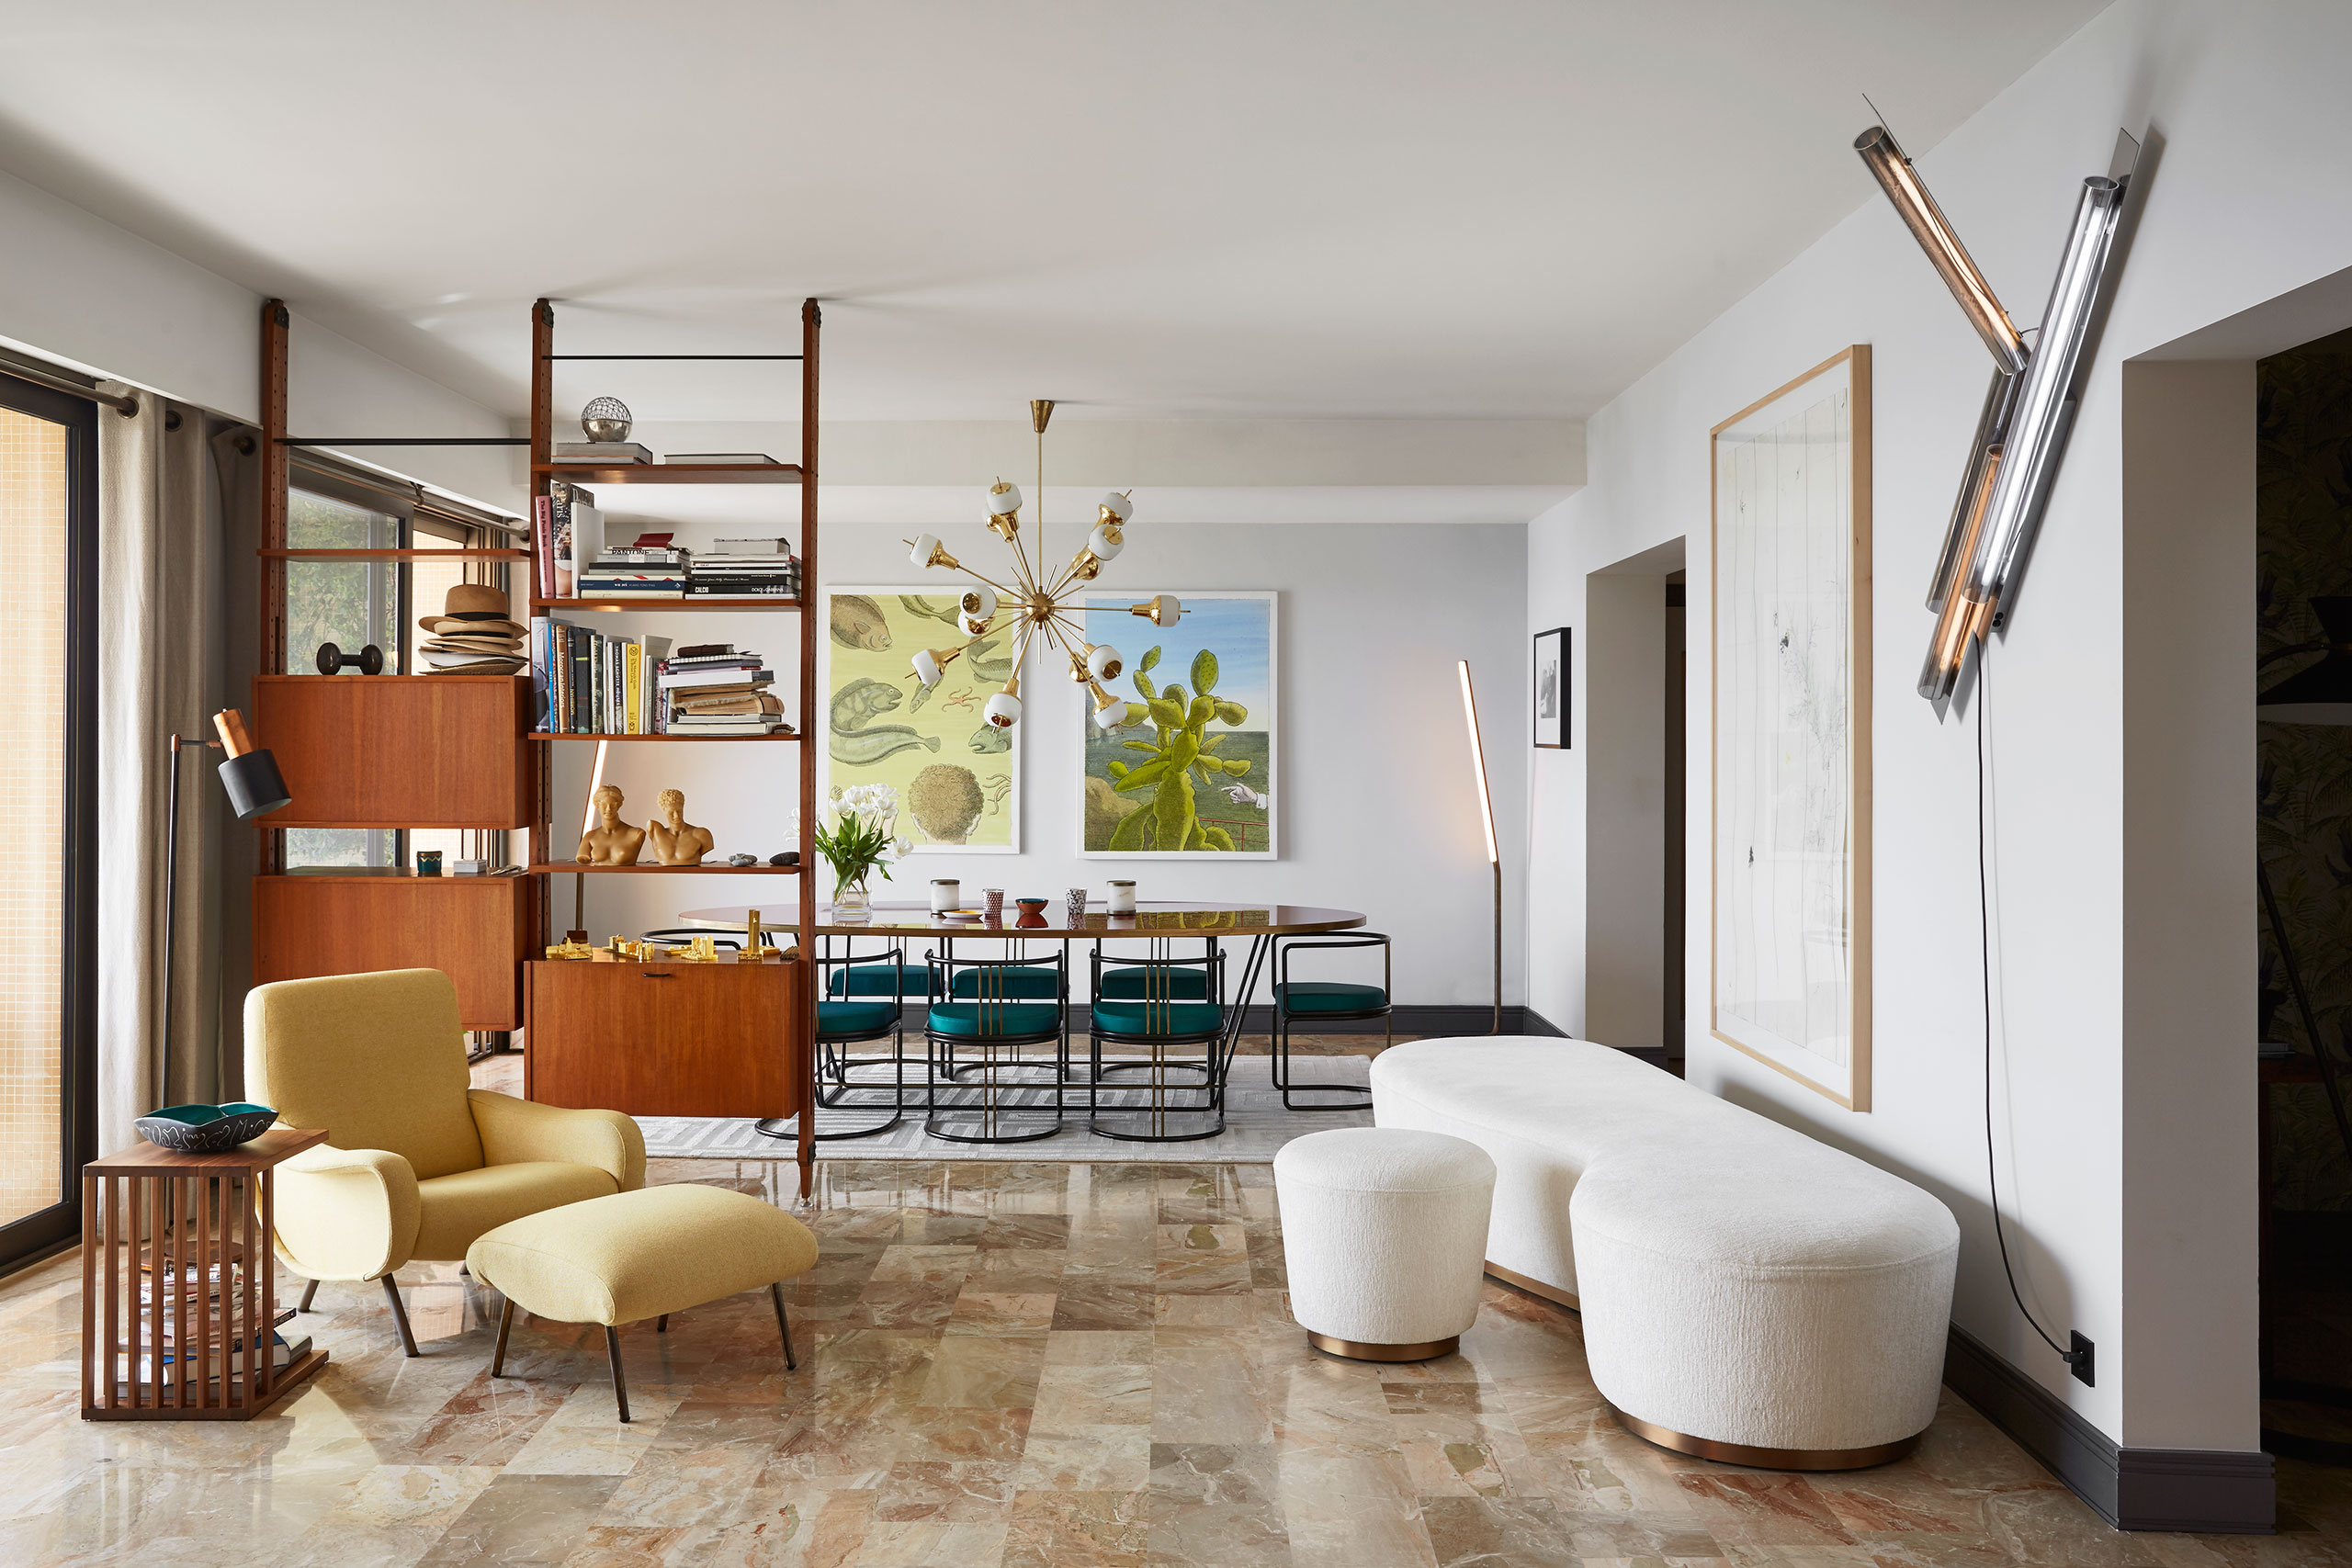 An Explosion of Mid-Century Modern Design in a Monaco Apartment mid-century modern design An Explosion of Mid-Century Modern Design in a Monaco Apartment An Explosion of Mid Century Modern Design in a Monaco Apartment 5